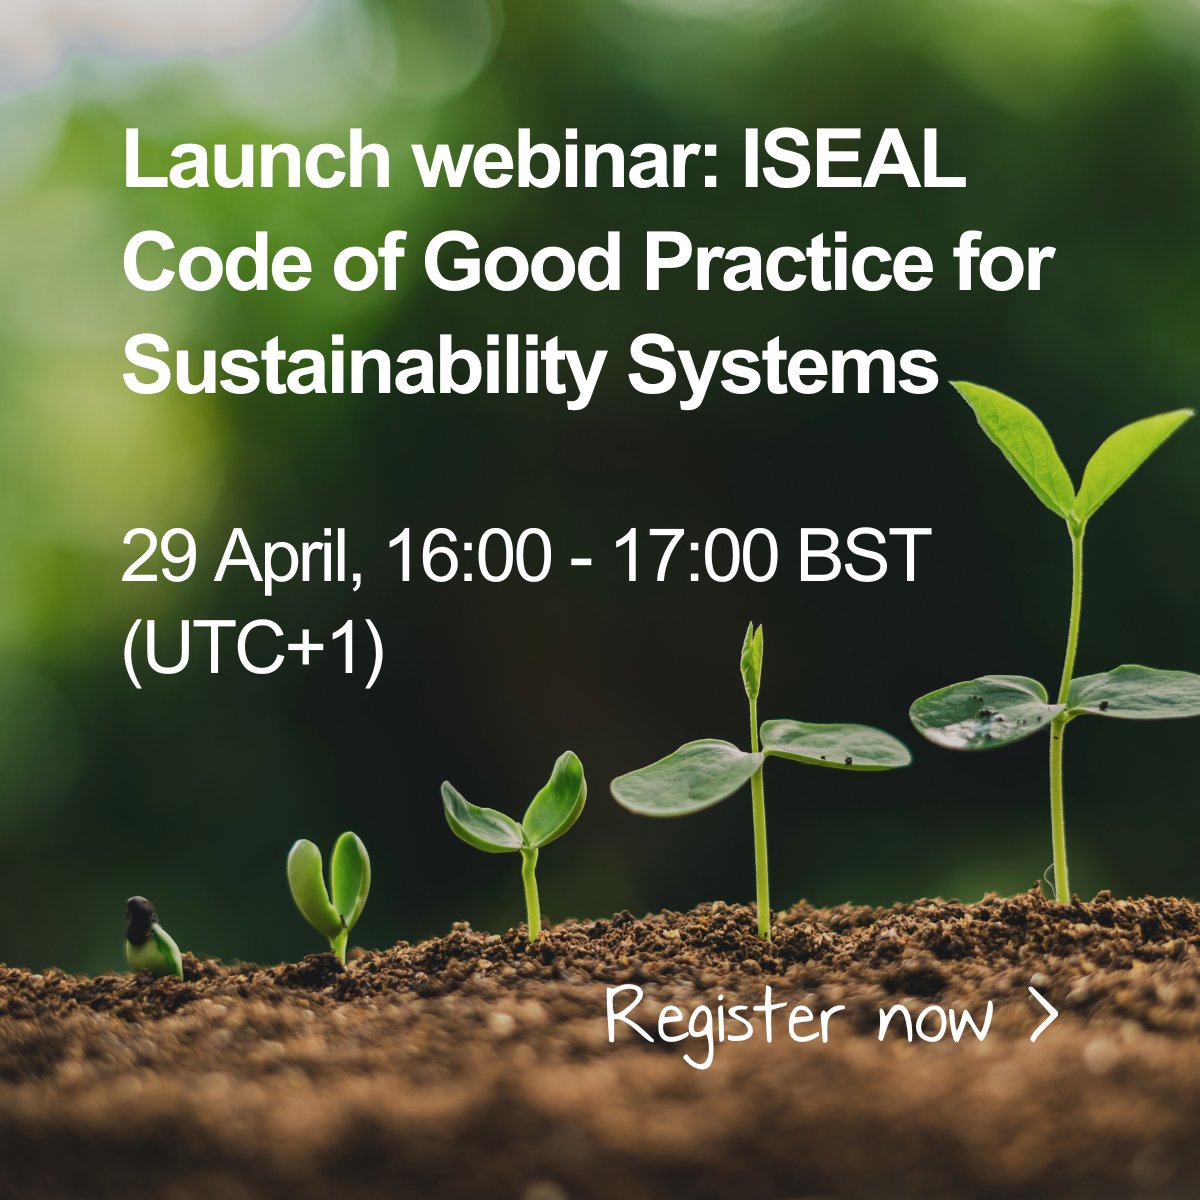 The ISEAL Code is here. Why is this important news for businesses interested in improving sustainability impacts? Discover more in our latest news piece > ow.ly/wk0V50RiZZL Register for our Code launch webinar on 29 April > ow.ly/n6uR50RiZZM